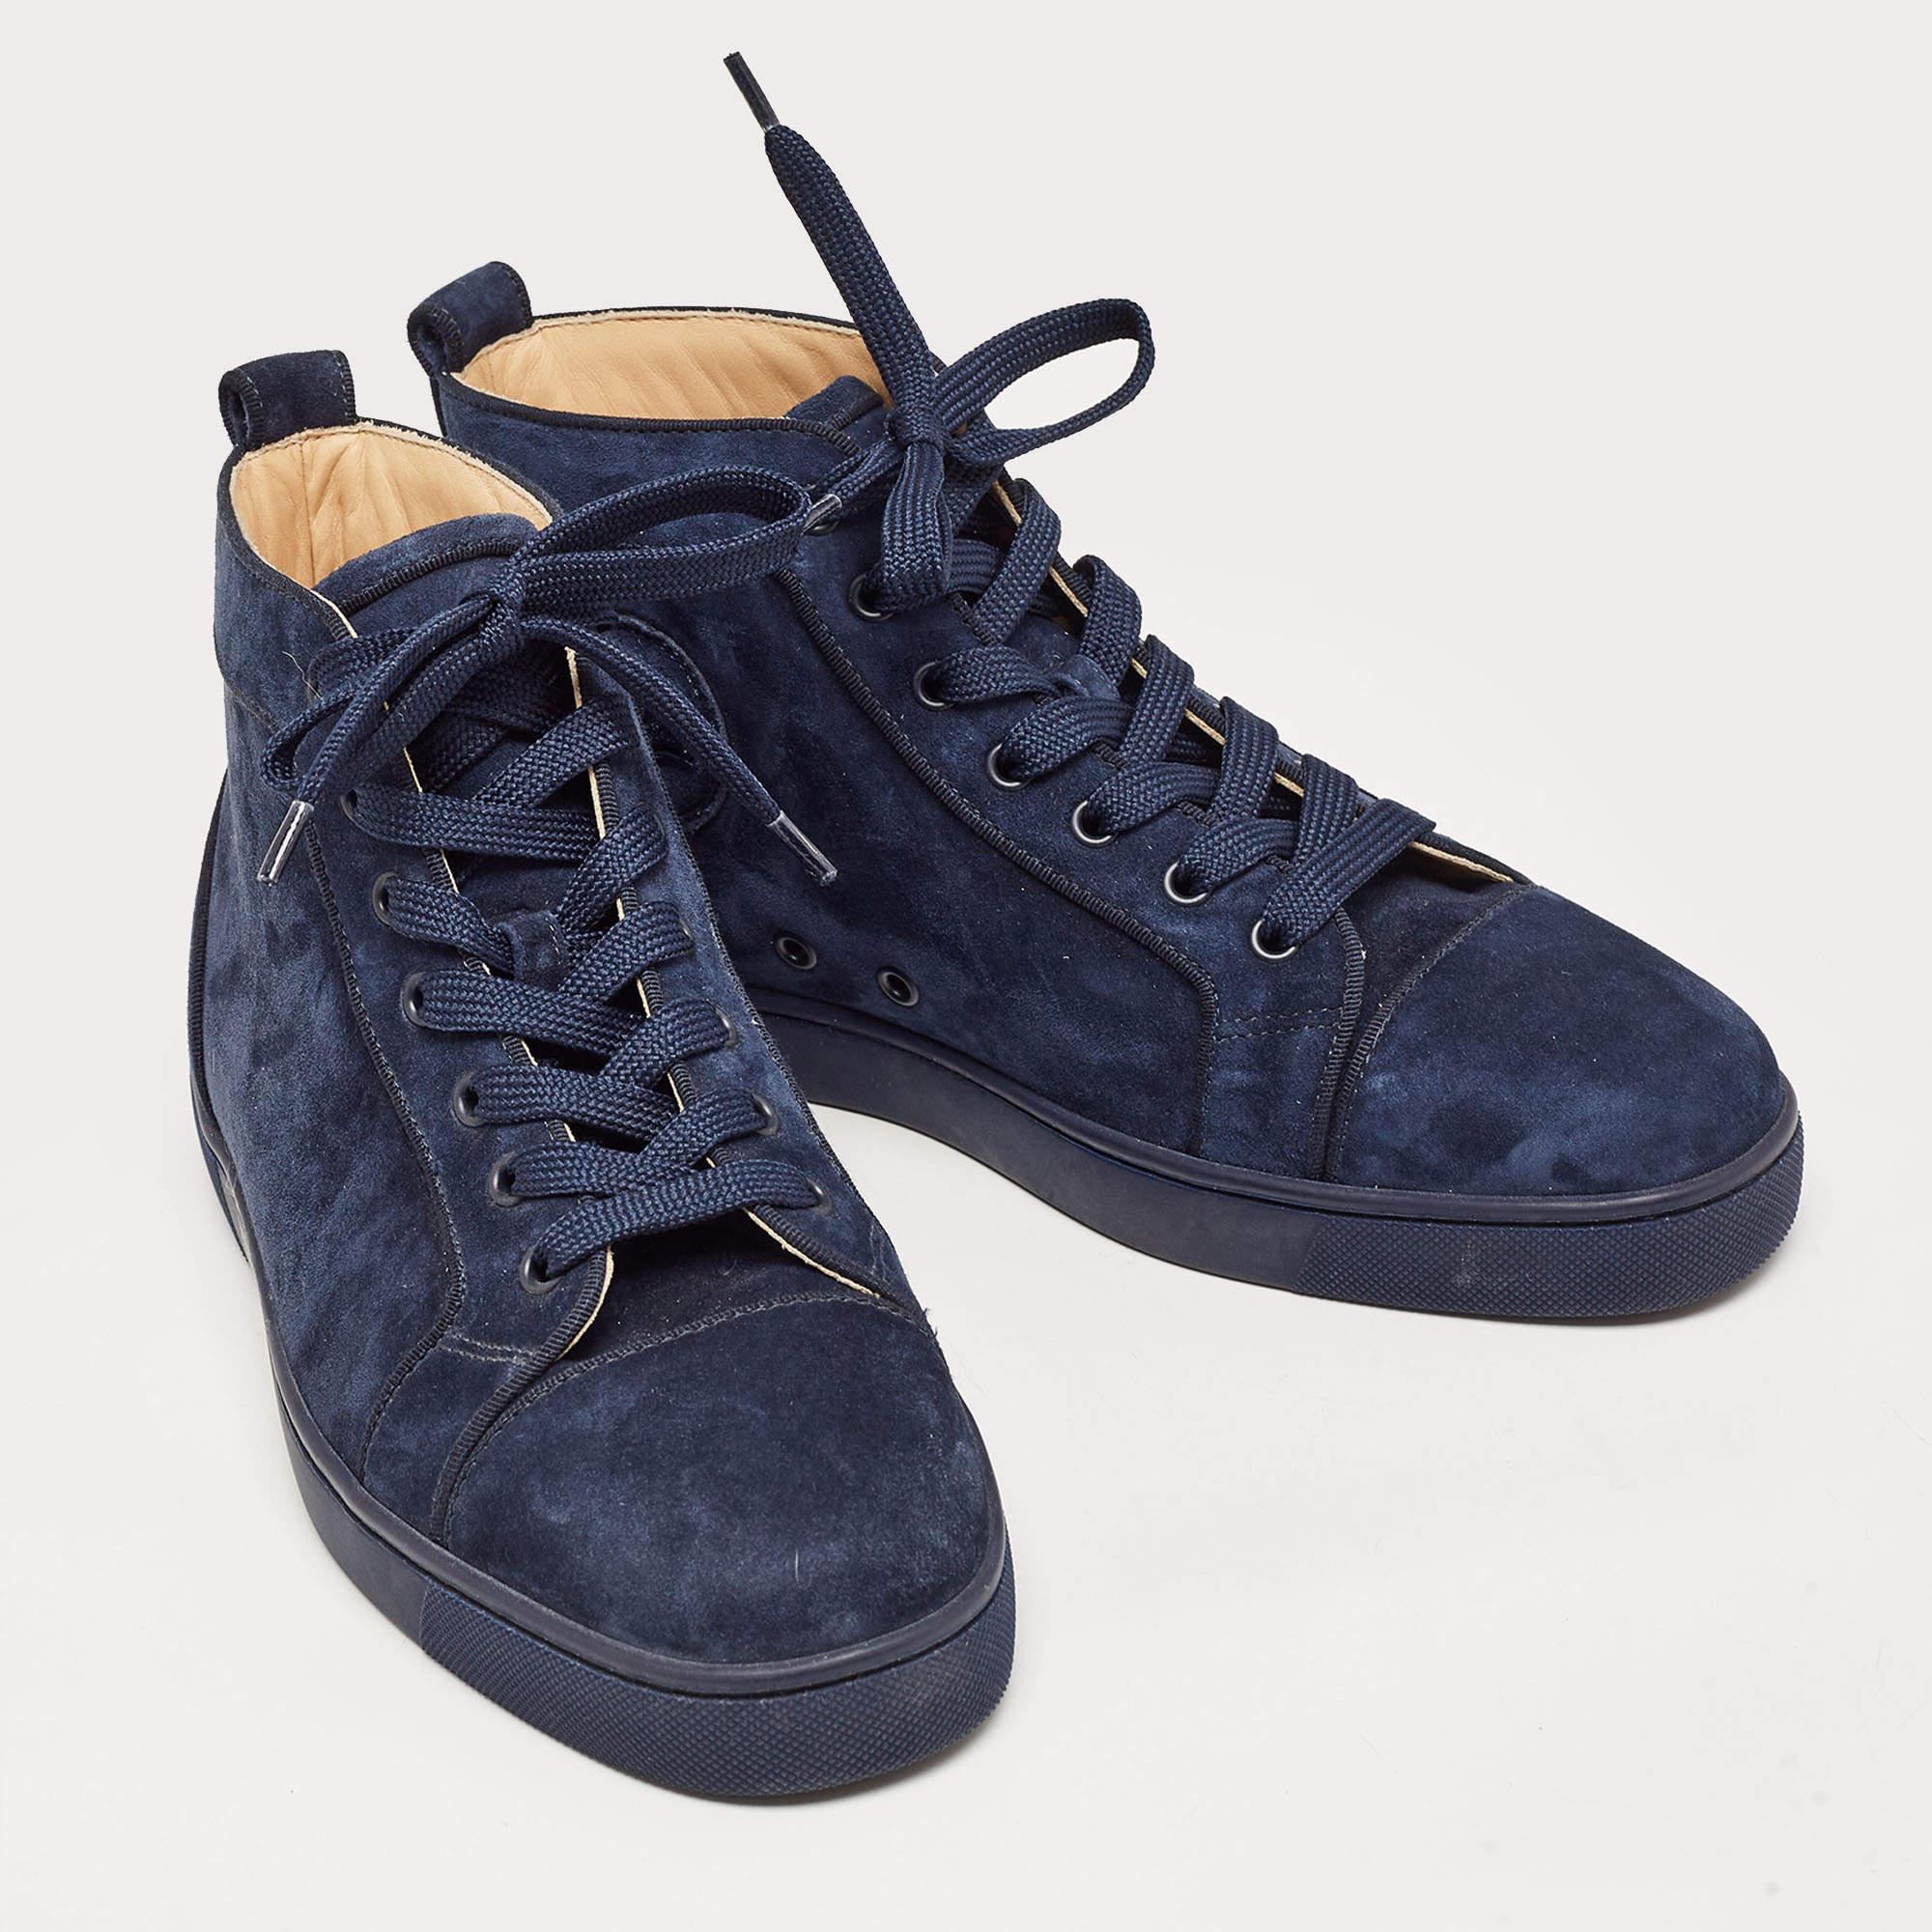 Christian Louboutin Navy Blue Suede High Top Sneakers Size 41 For Sale 2